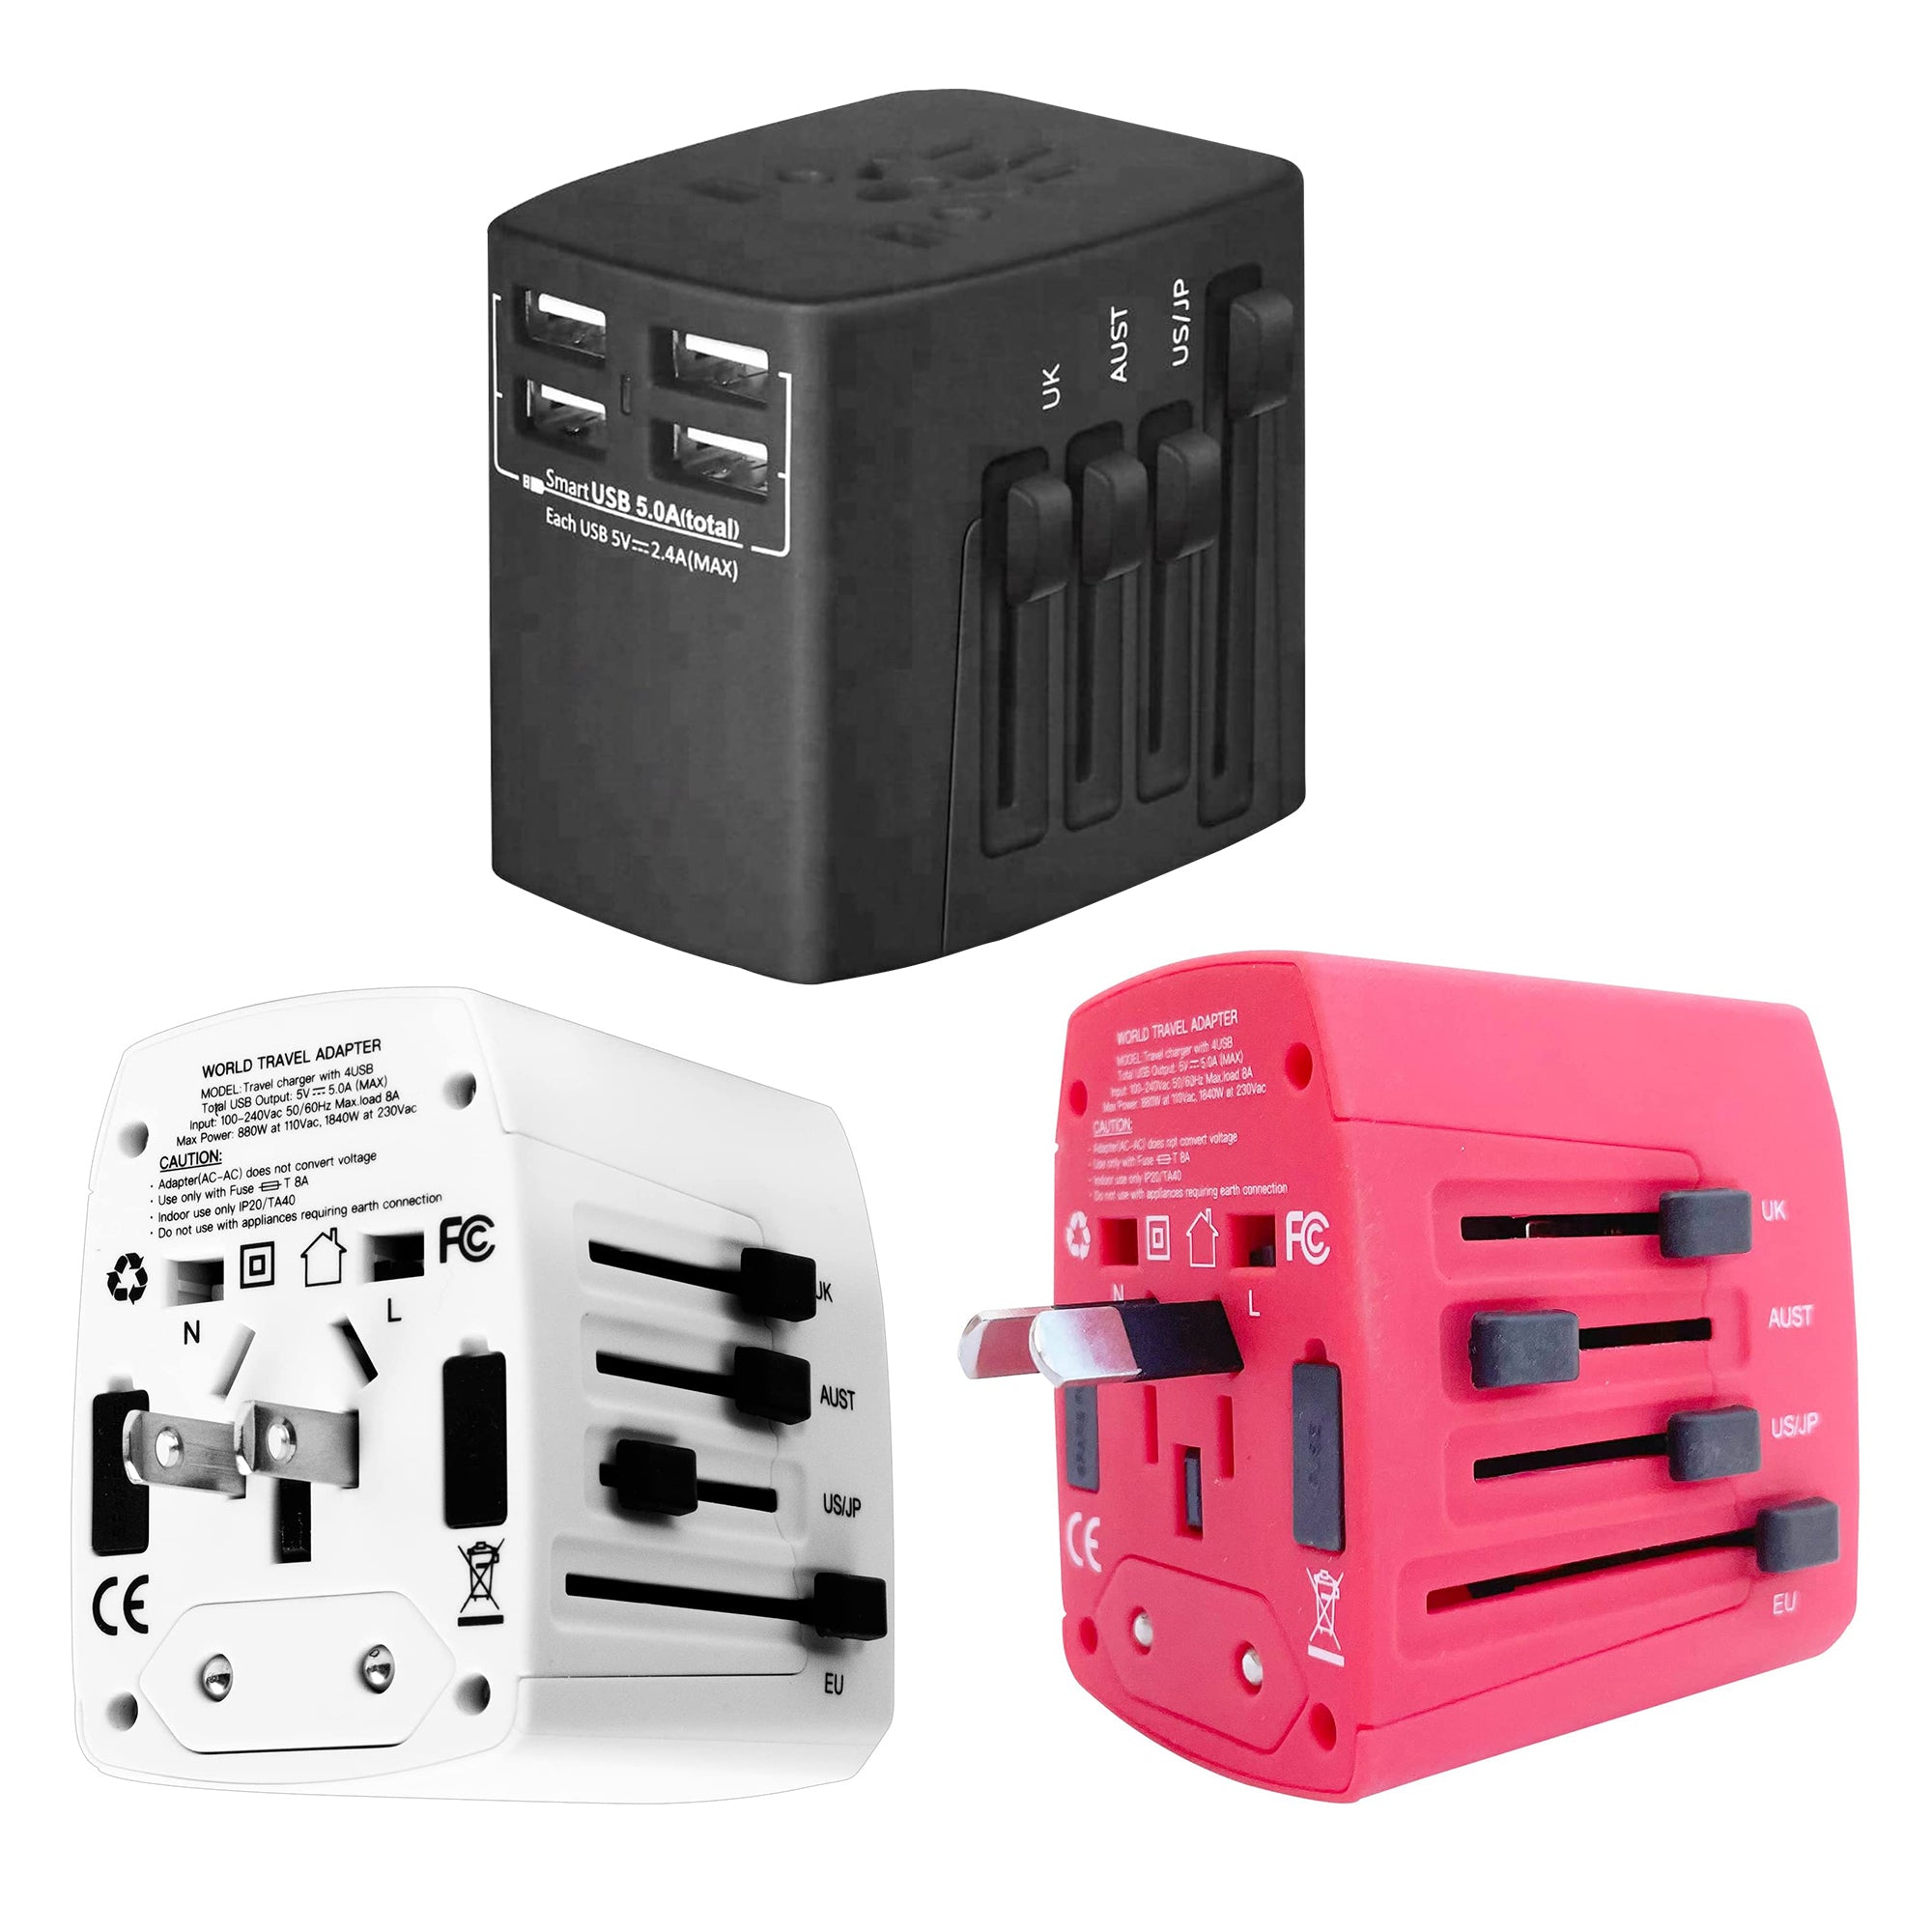 5 Core Travel Adapter 3 Pieces International Power Adapter Plug Multi Outlet Port 4 USB Travel Charger Universal AC Plug Outlet Adapter- UTA 3pcs BRW